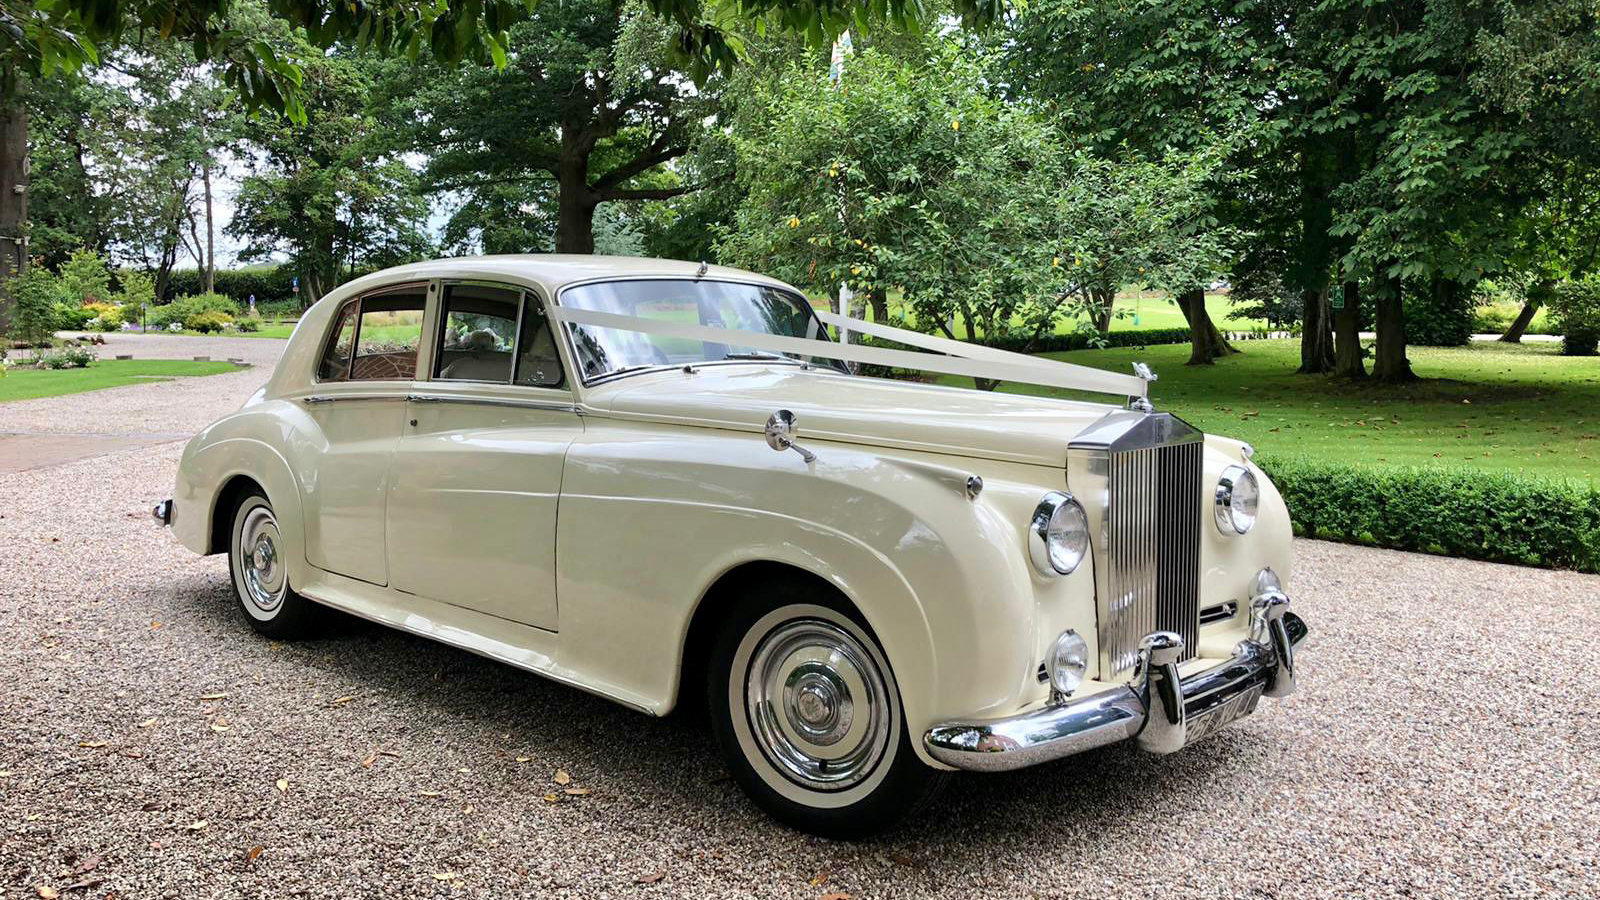 Ivory classic Rolls-Royce Silver Cloud dressed with a traditional V-shape ivory ribbons across its front bonnet. Vehicle is standing in the middle of a path in a London Park.